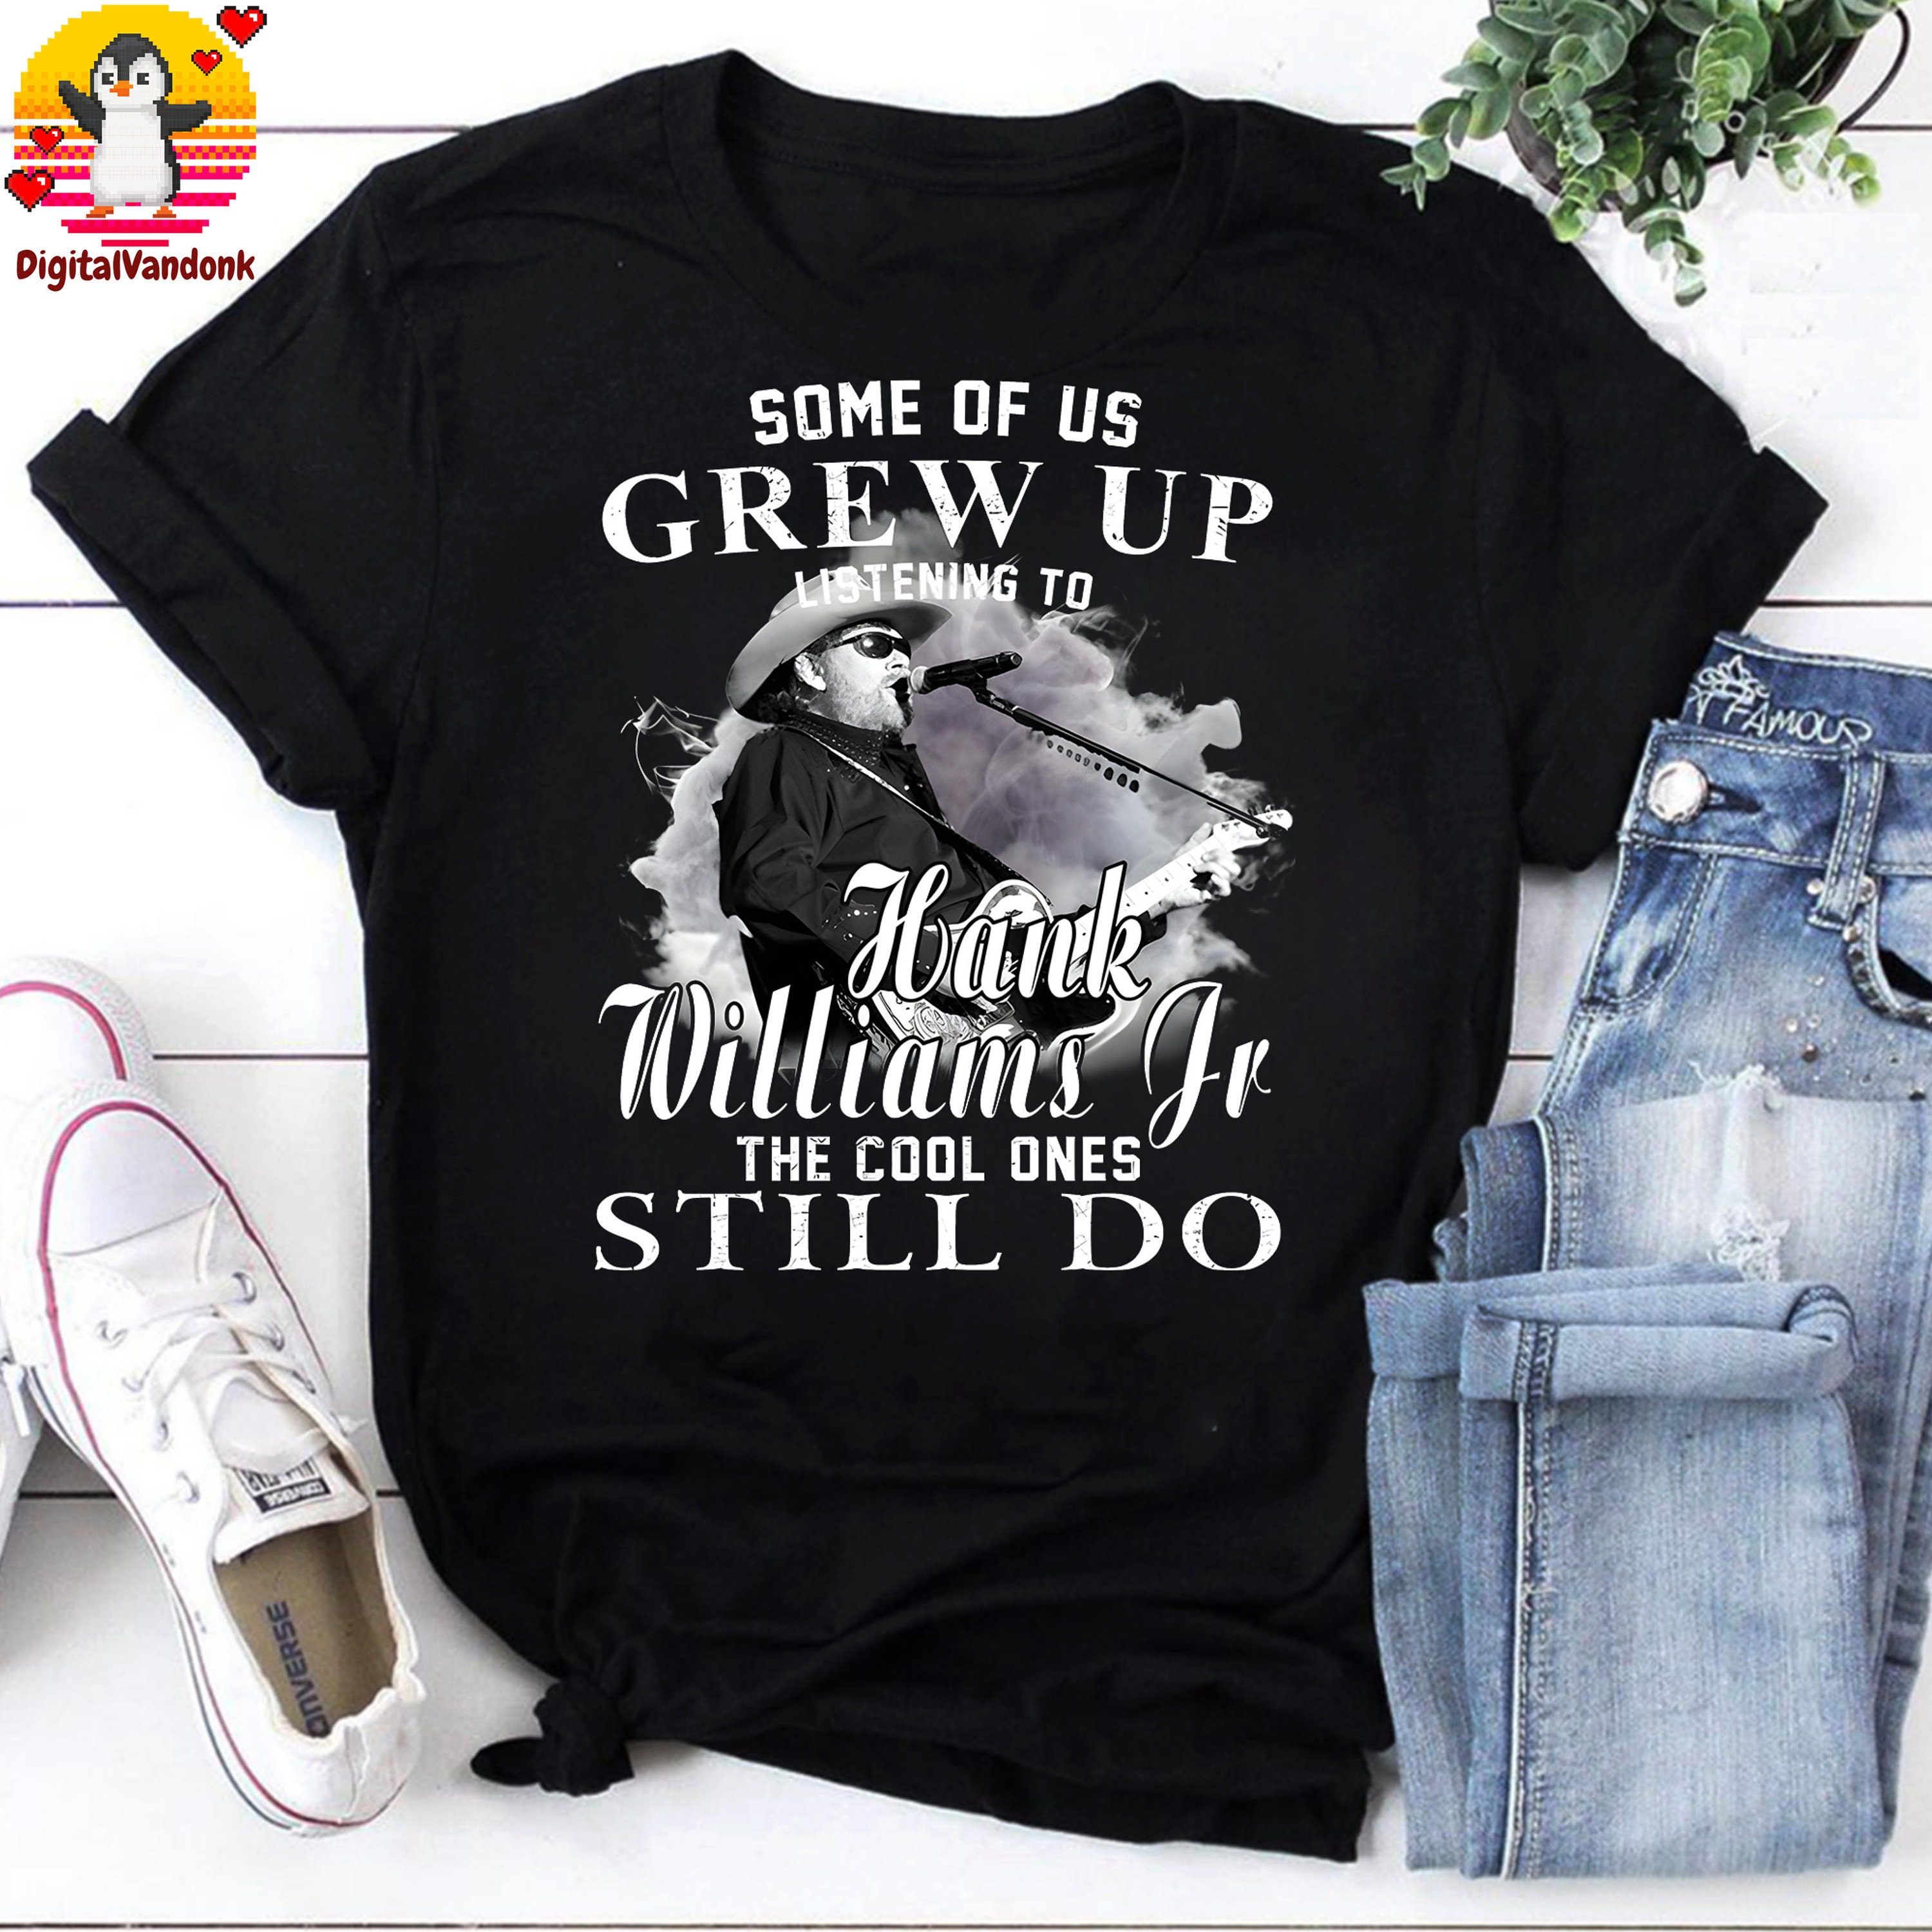 Discover Some Of Us Grew Up Listening To Hank Williams Jr The Cool Ones Still Do Vintage T-Shirt